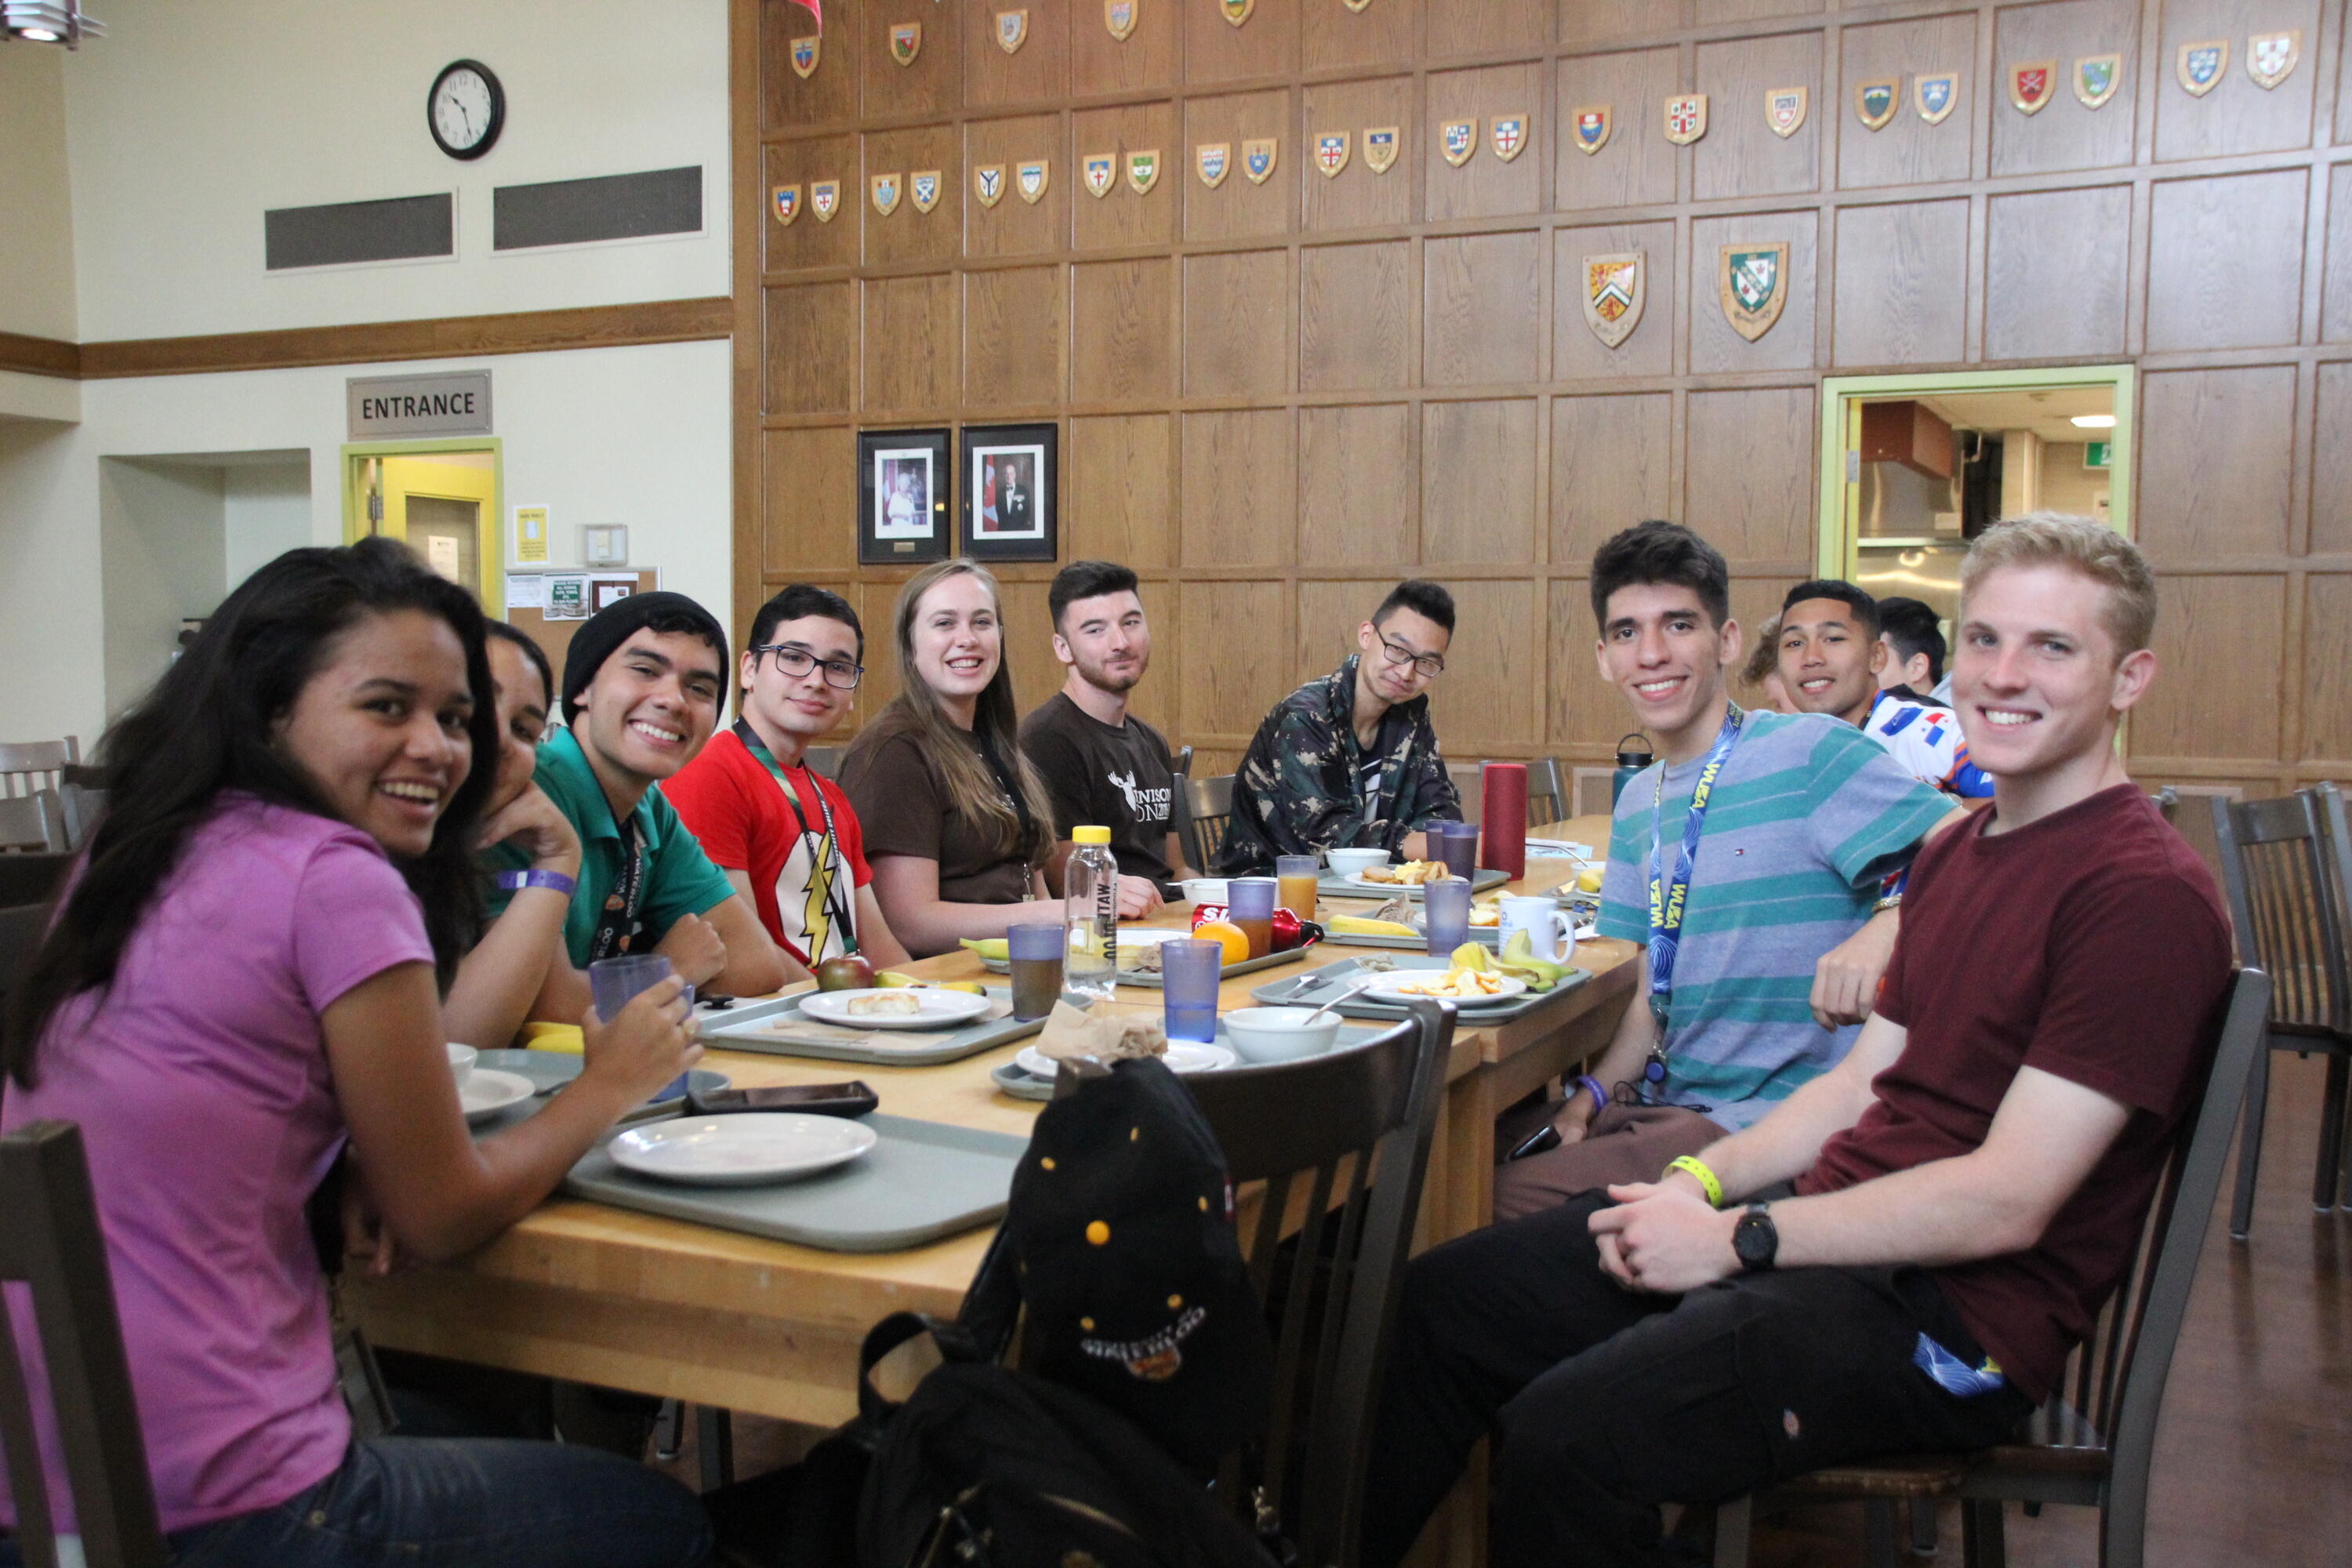 group of students at table eating and smiling